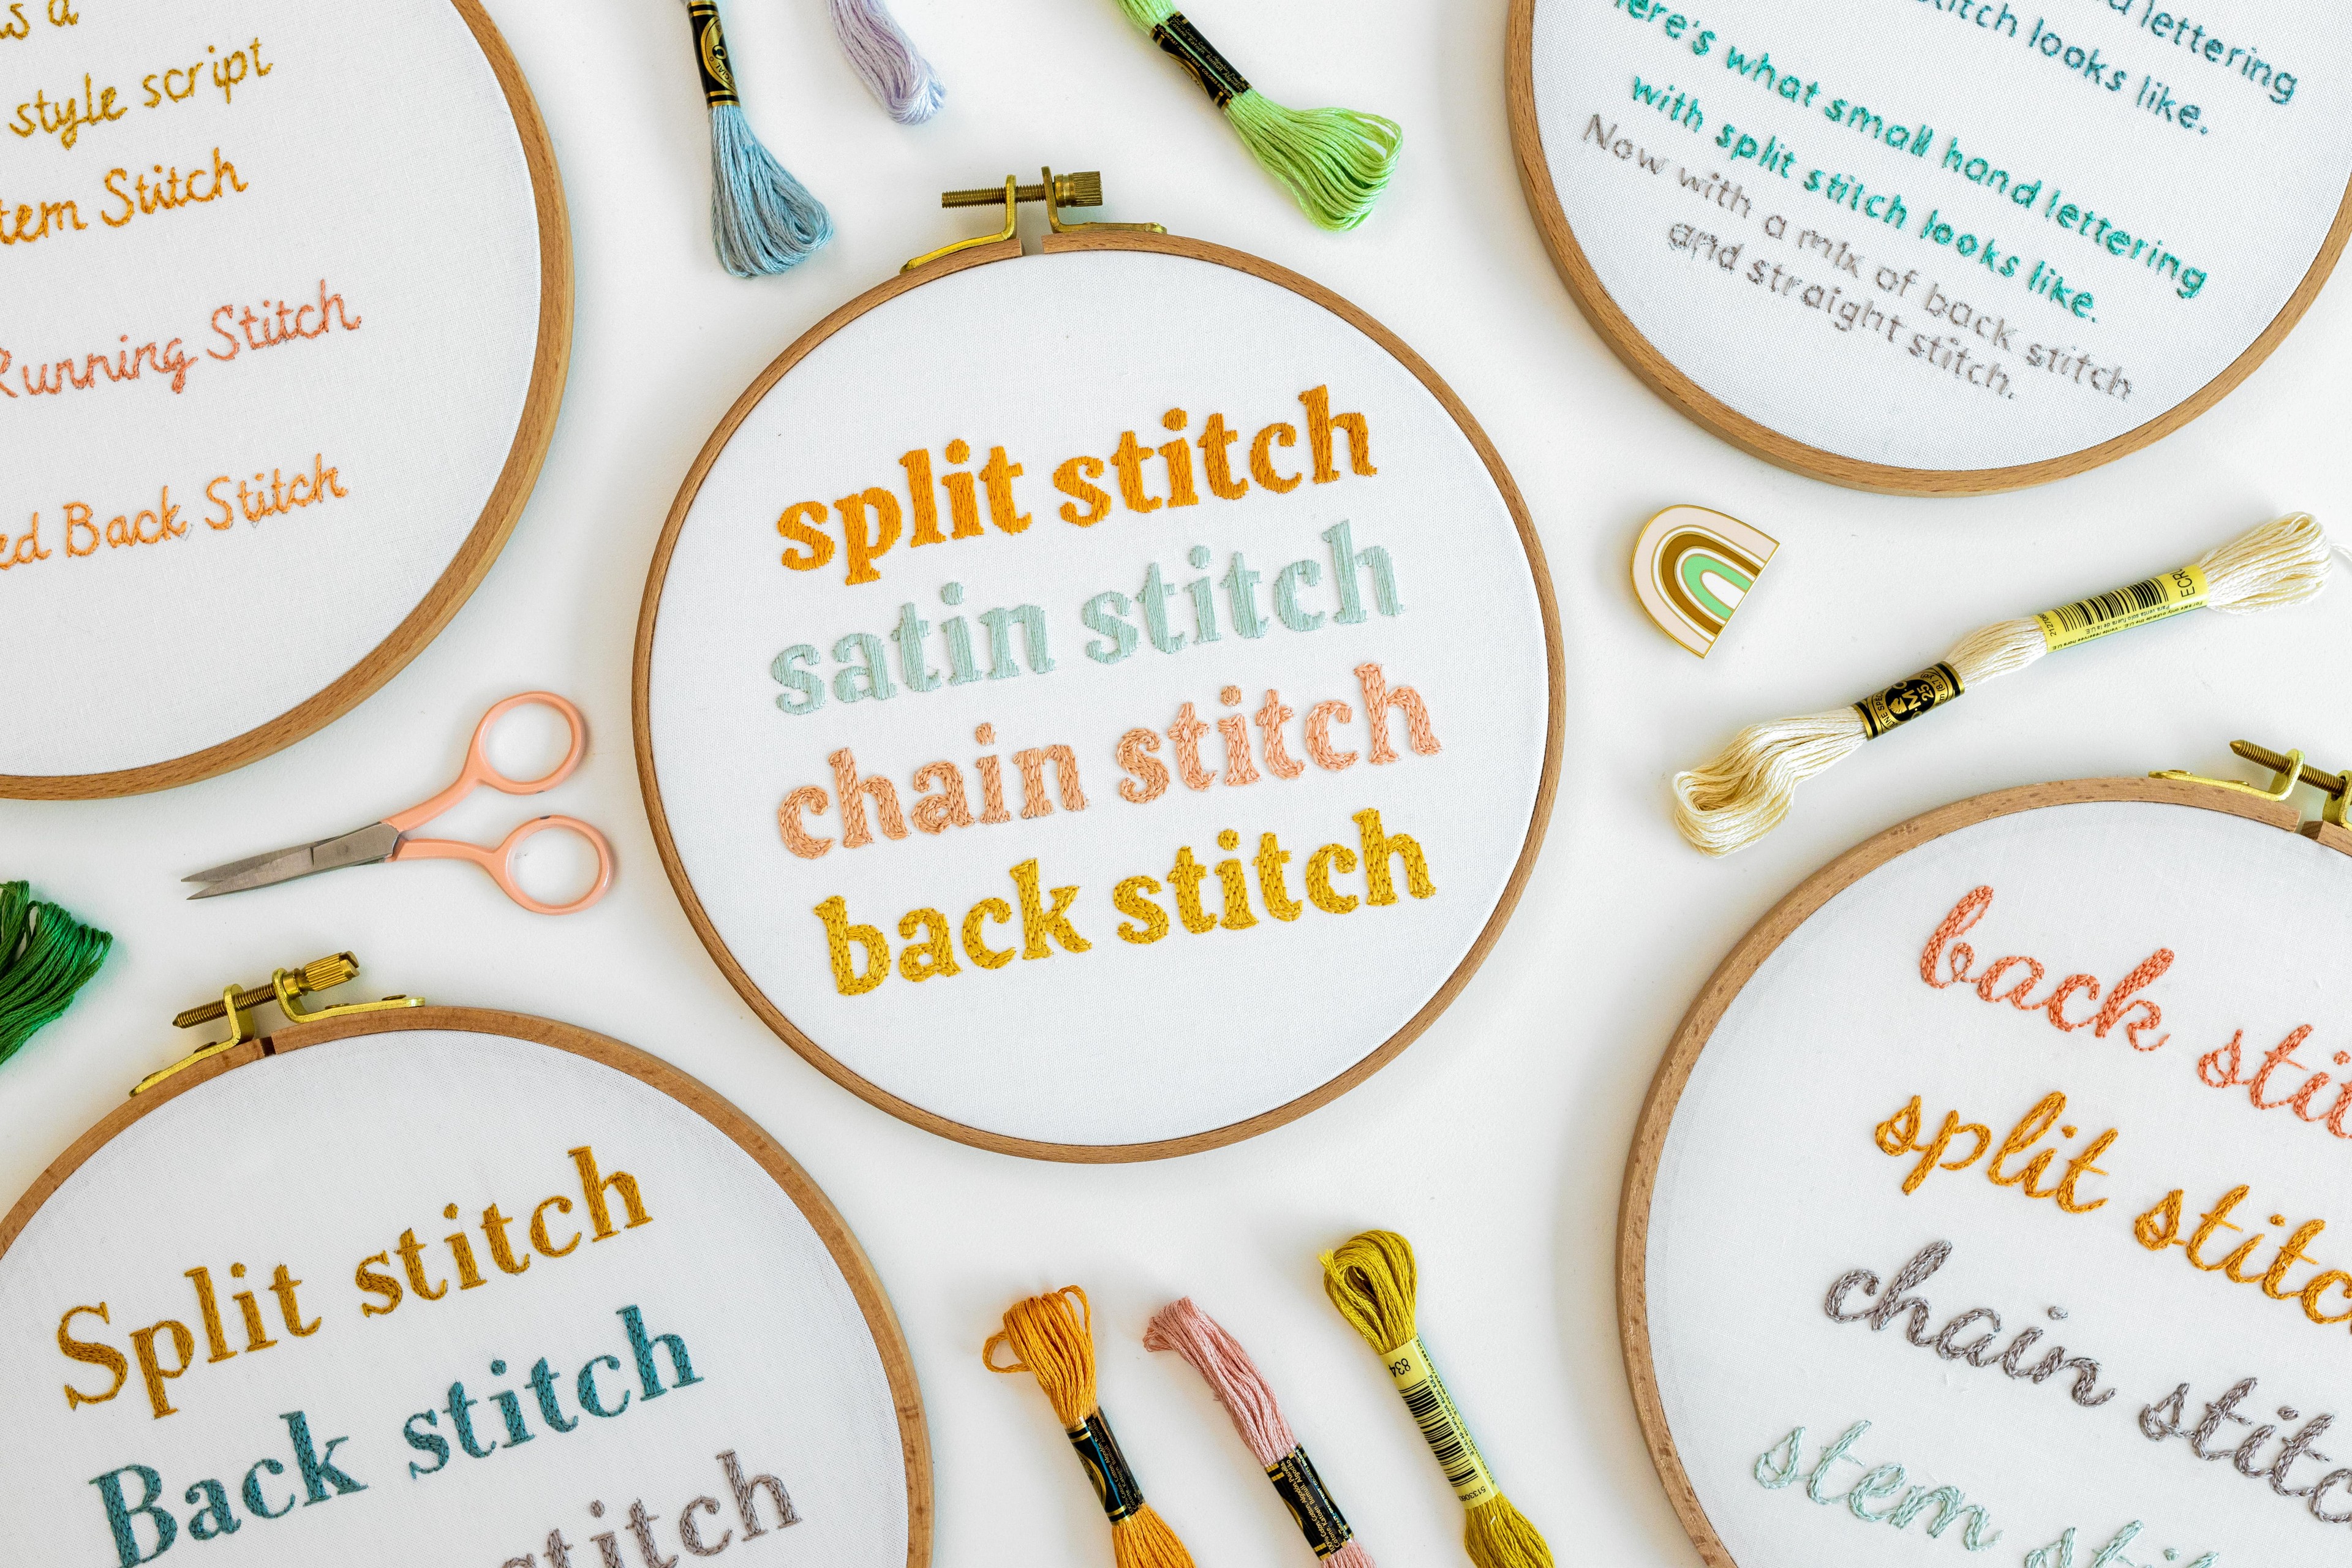 This is an image of different stitches and writing on modern embroidery hoops.